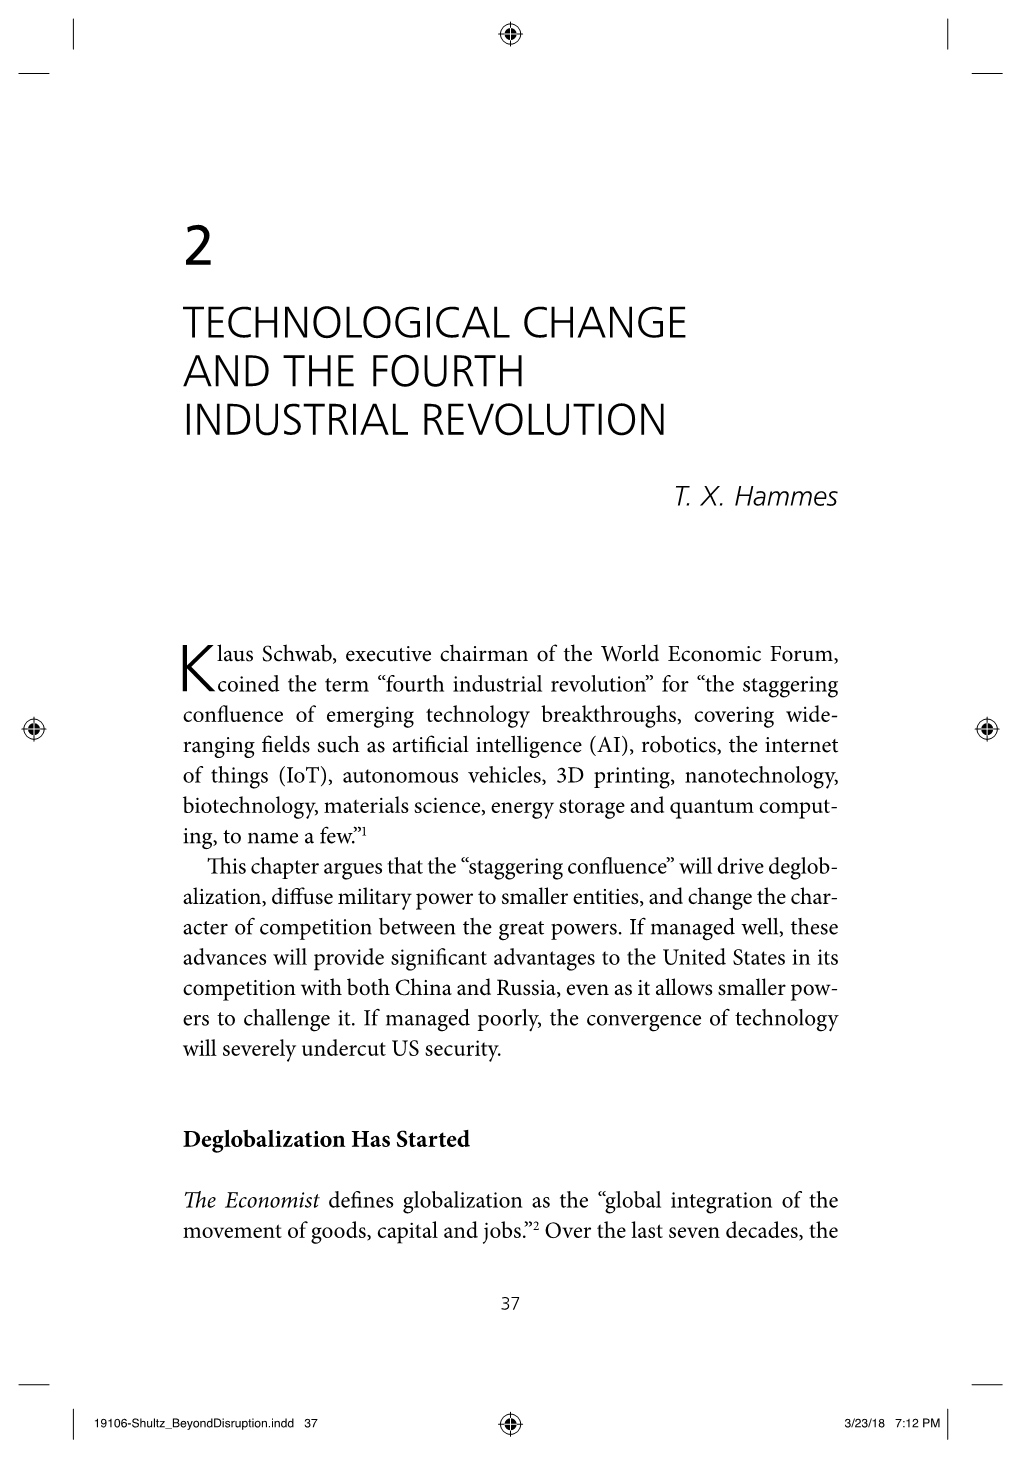 CHAPTER 2: Technological Change and the Fourth Industrial Revolution